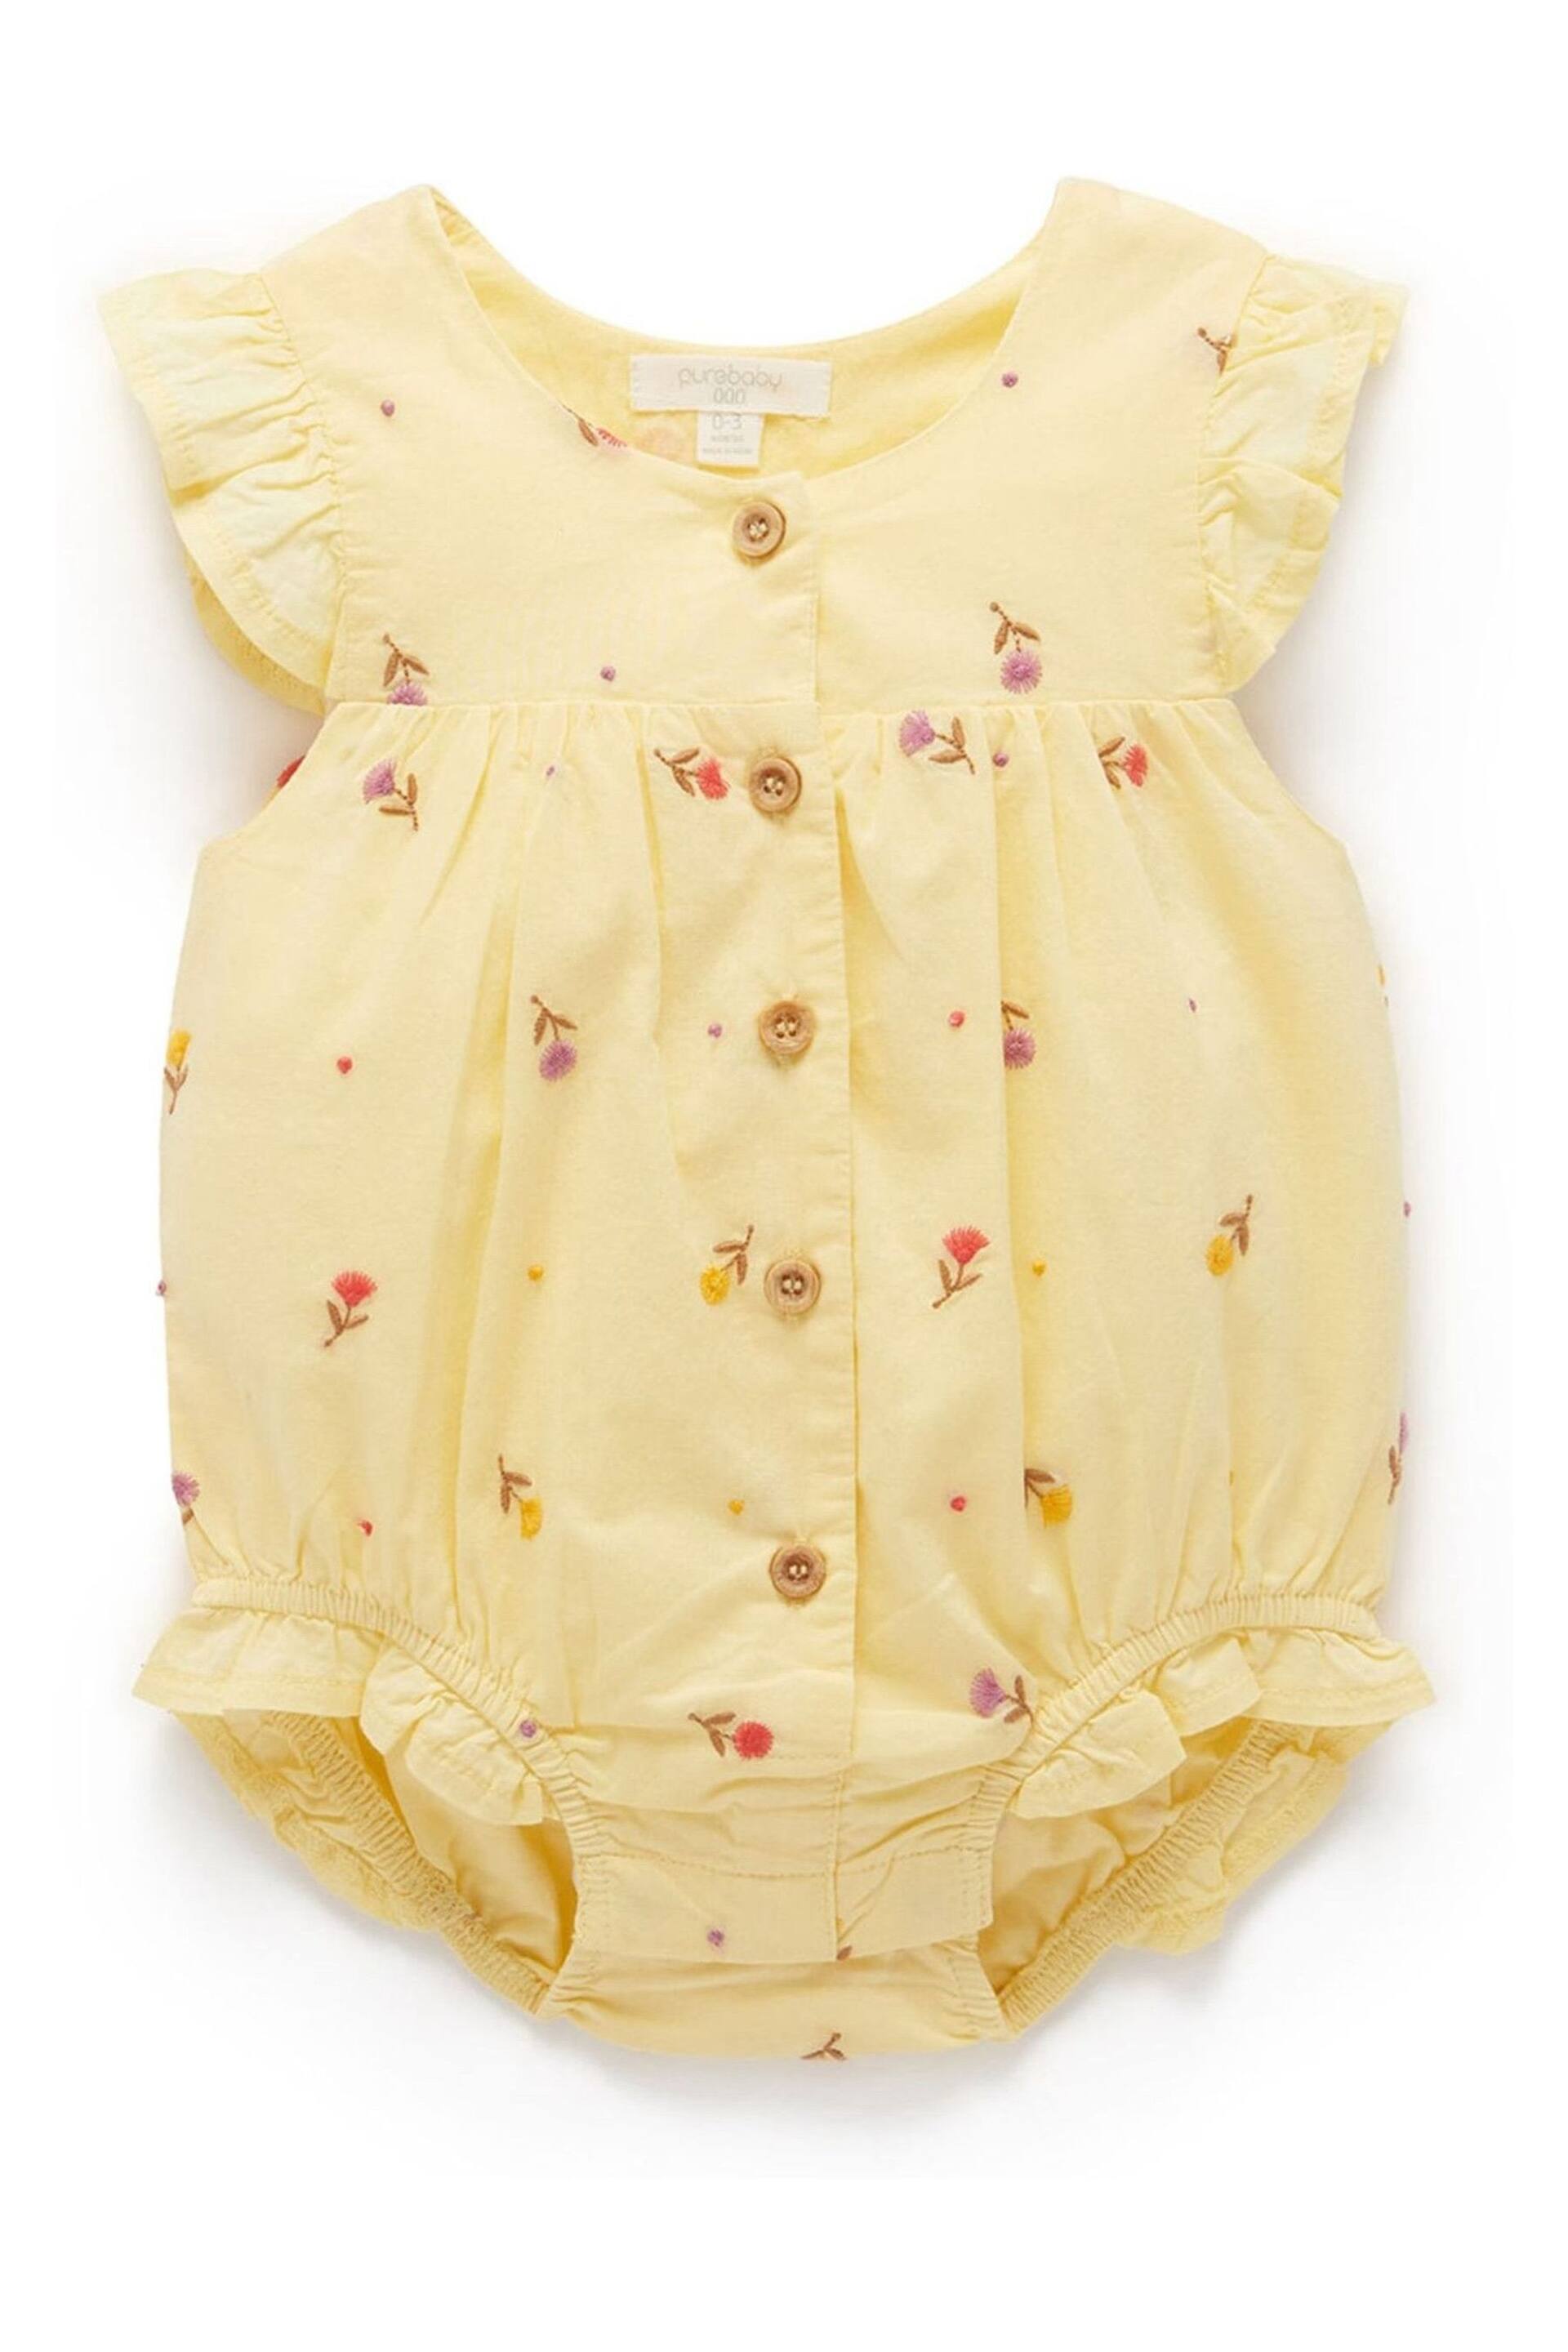 Purebaby Yellow Embroidered Romper - Image 1 of 4